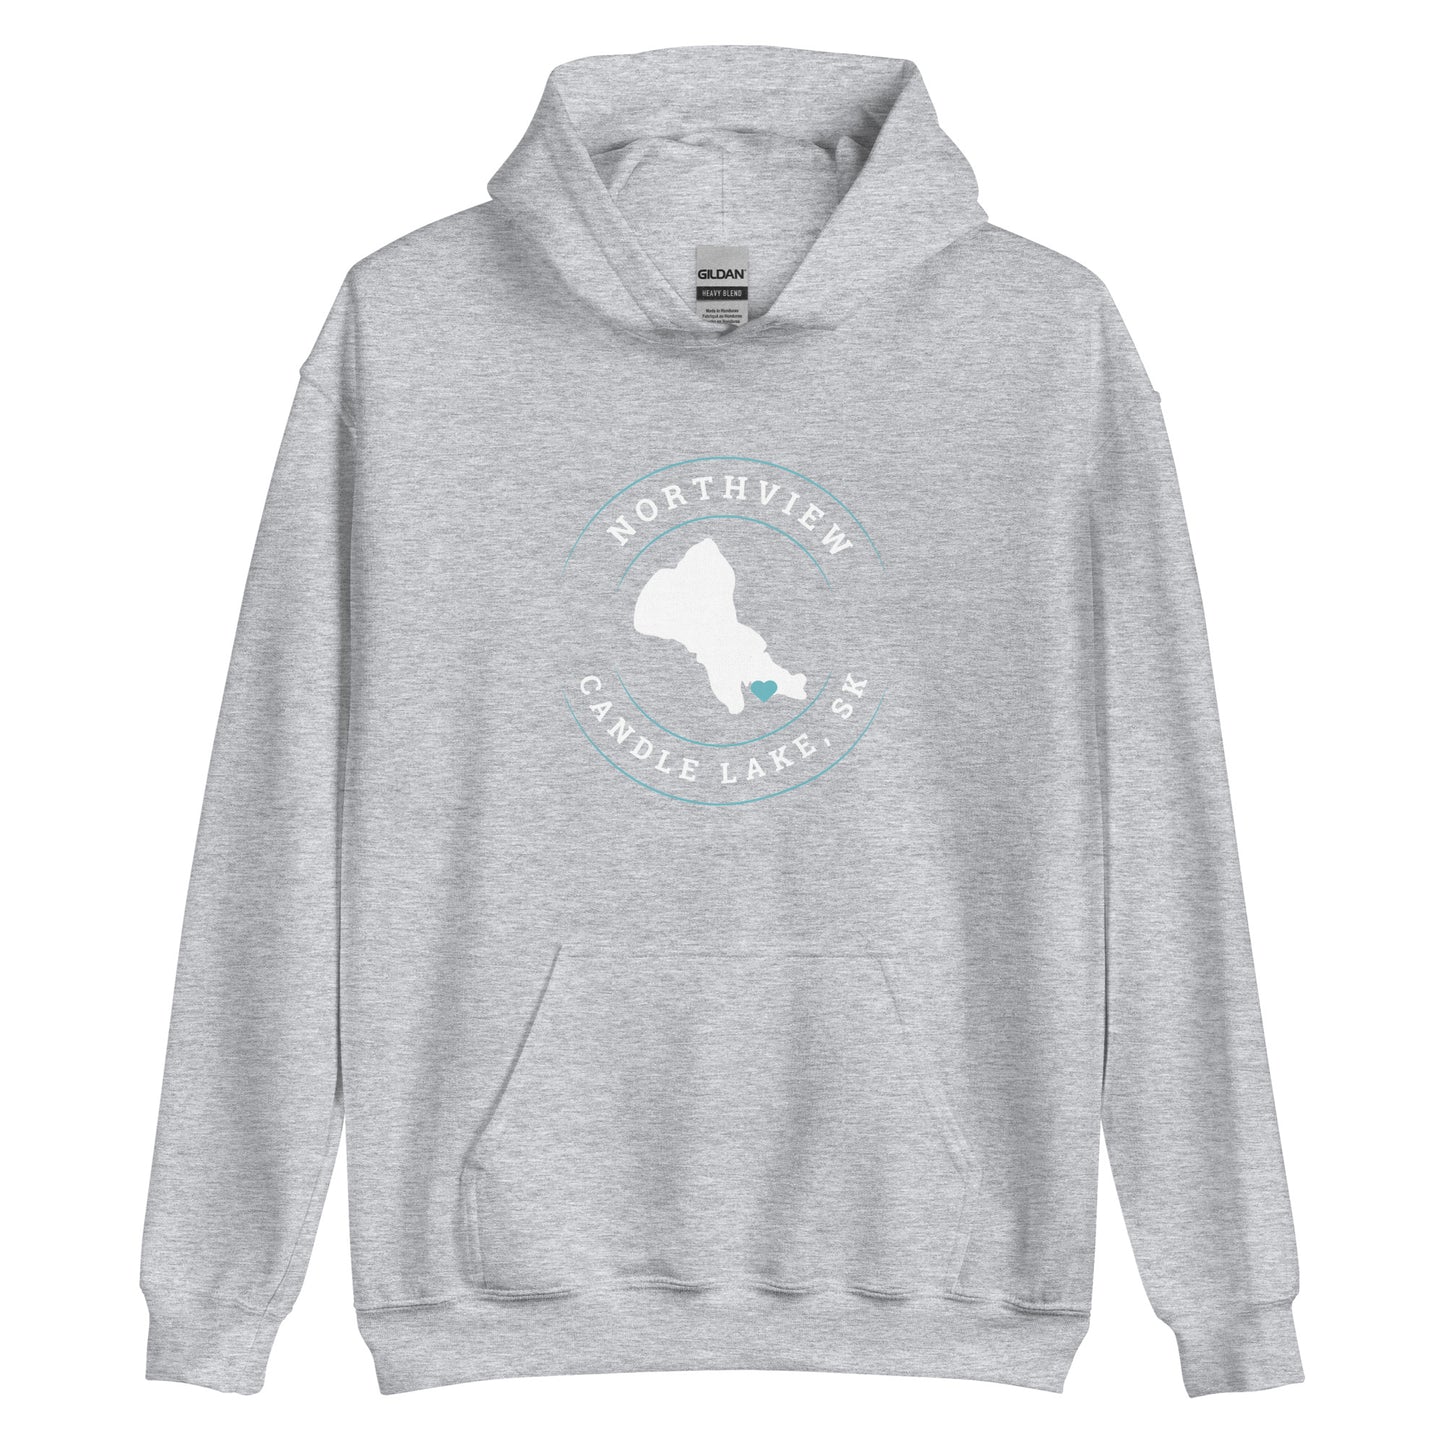 Candle Lake, SK - Unisex Hoodie - Northview